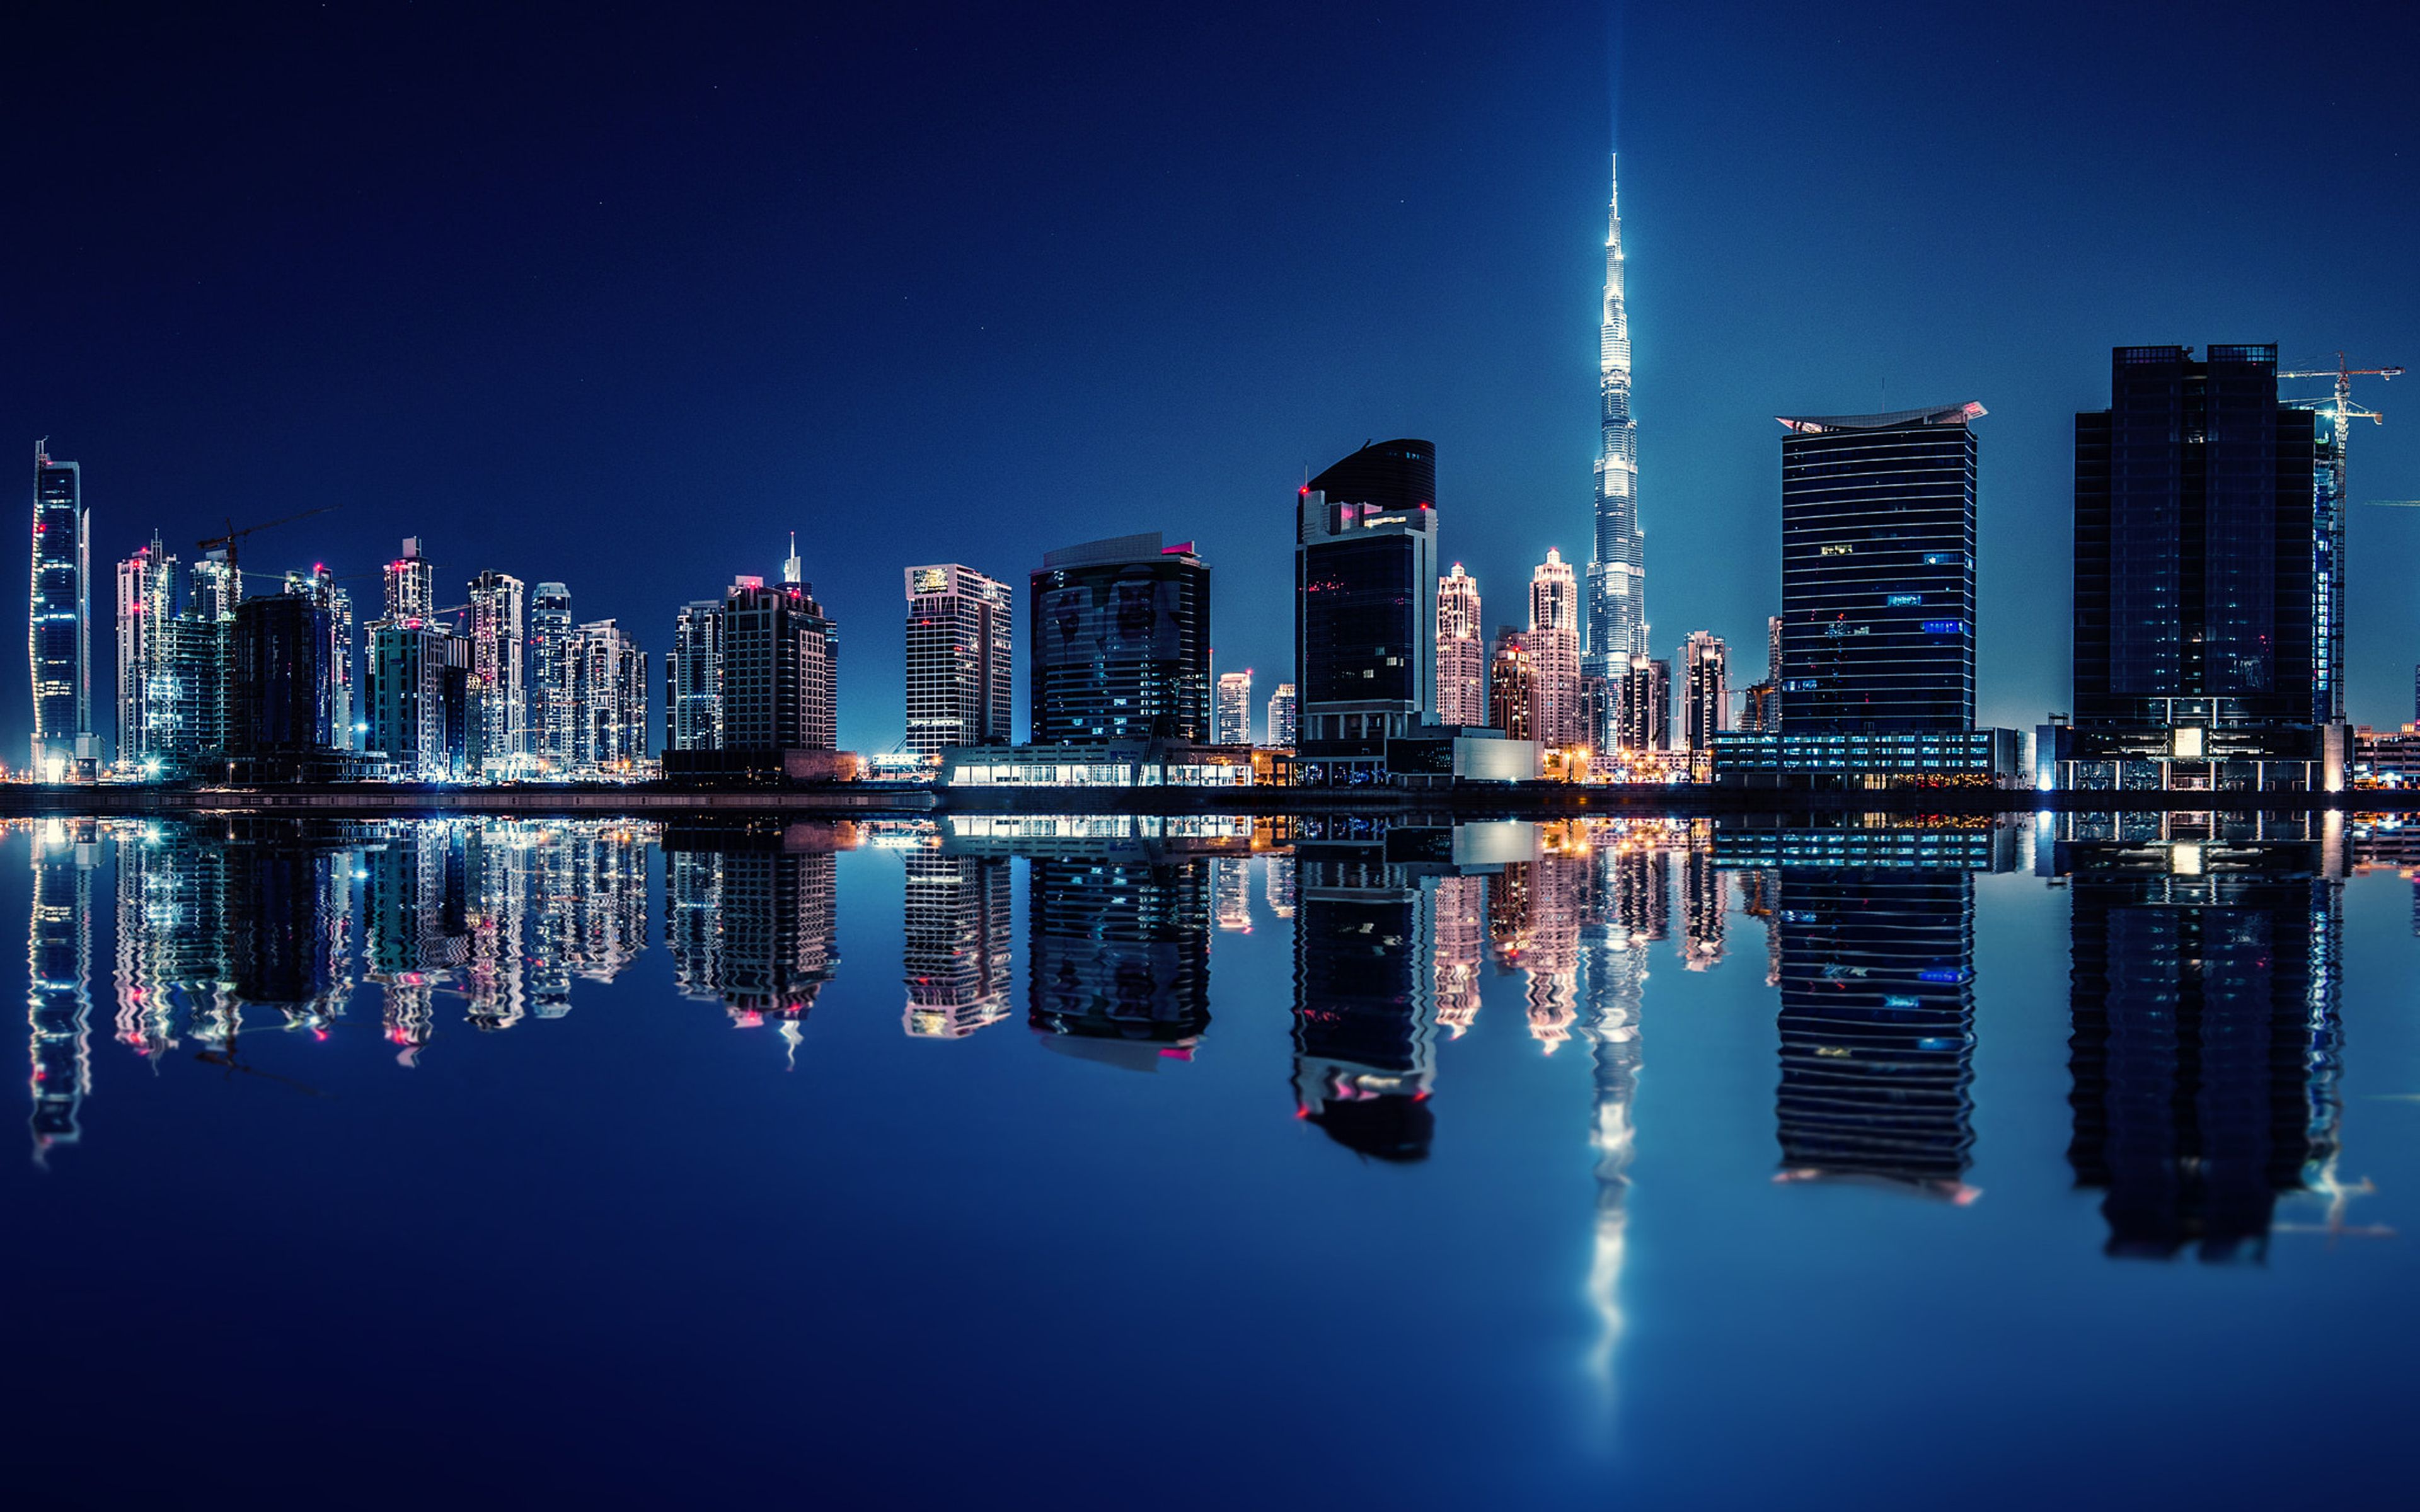 United Arab Emirates Dubai Reflection On Midnight 4k Ultra HD Desktop Wallpaper For Computers Laptop Tablet And Mobile Phones 3840x2400, Wallpaper13.com